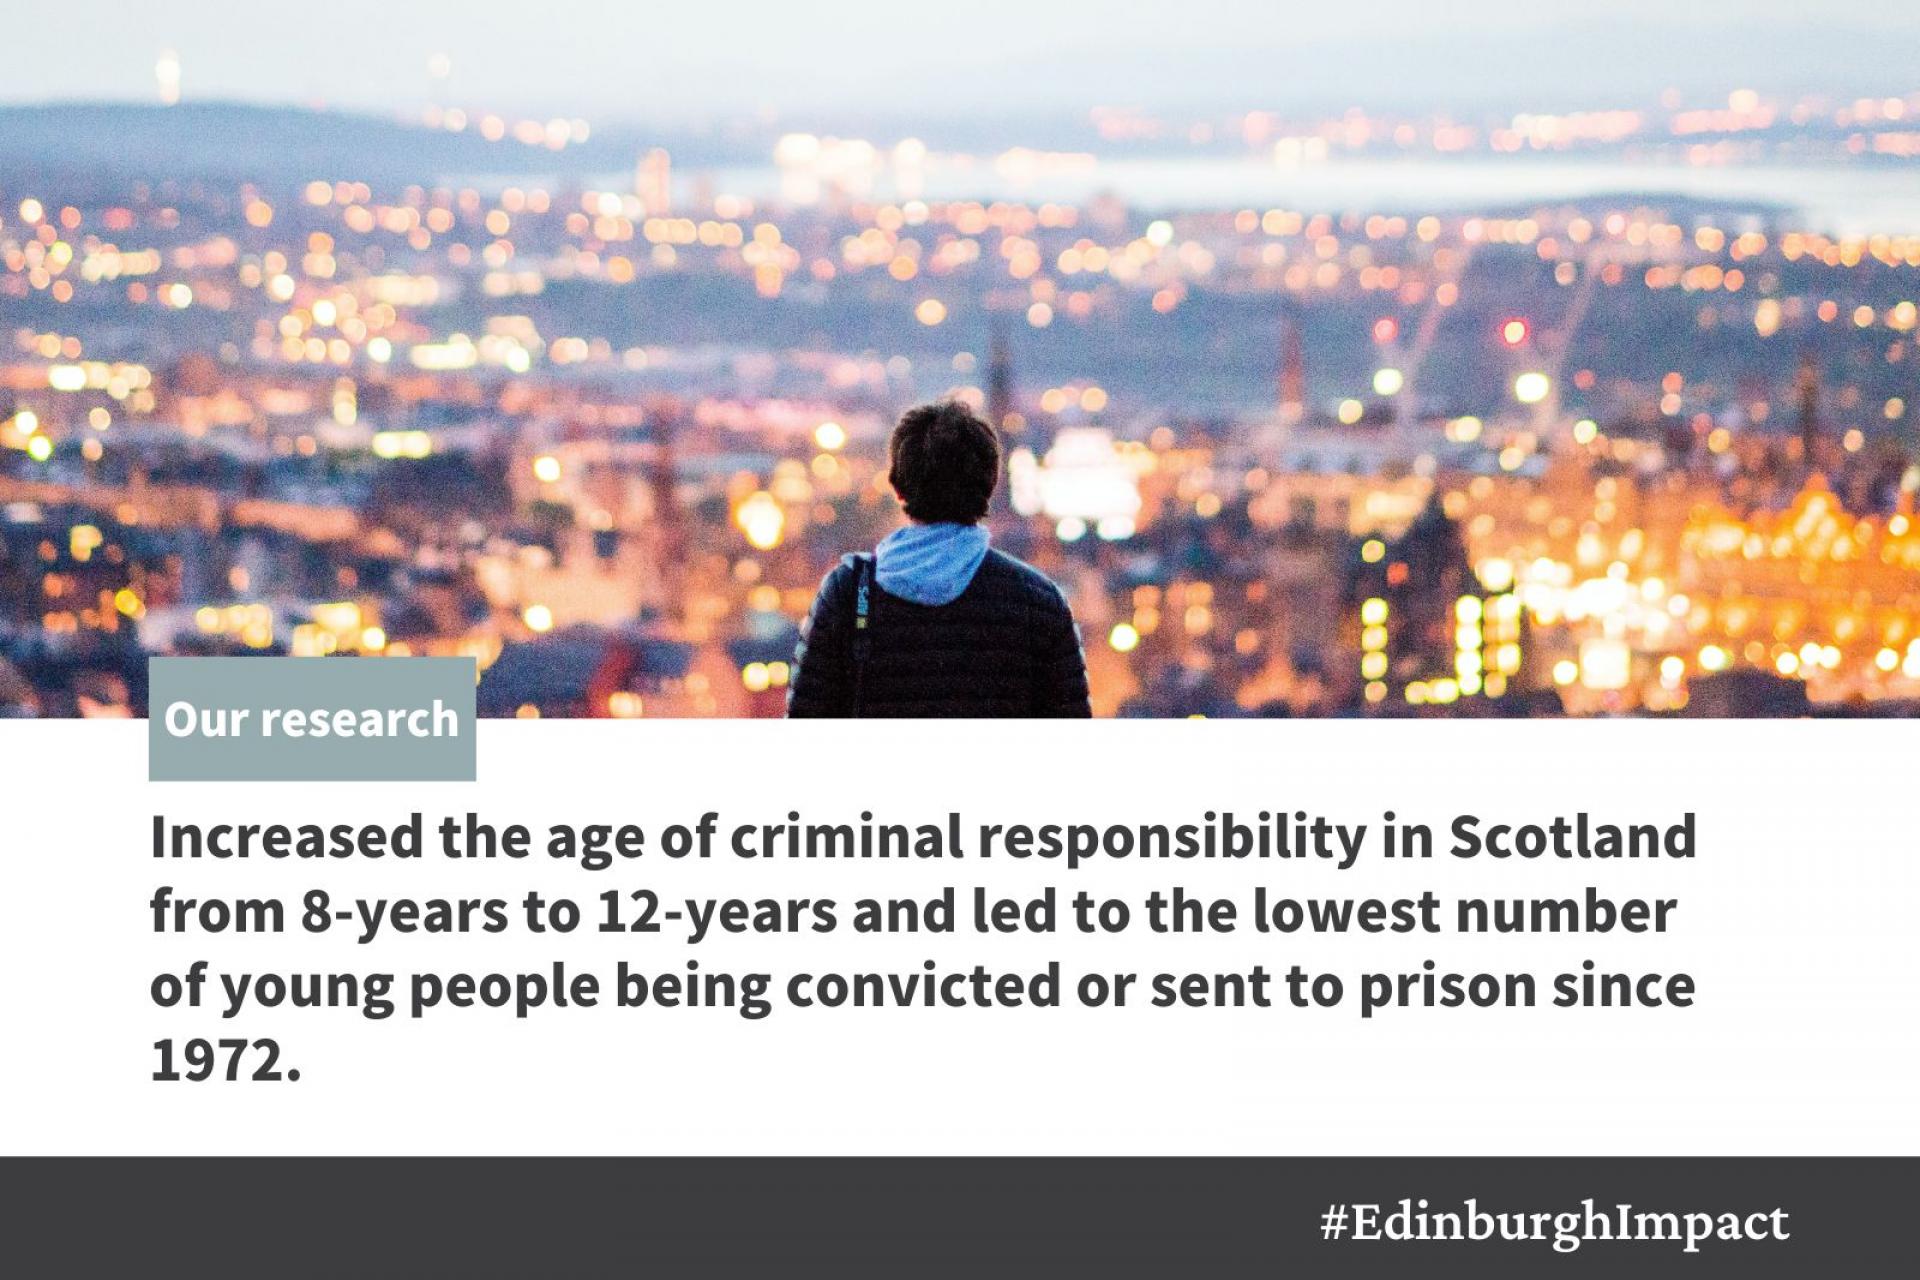 Our research increased the age of criminal responsibility in Scotland from 8-years to 12-years and led to the lowest number of young people being convicted or sent to prison since 1972.